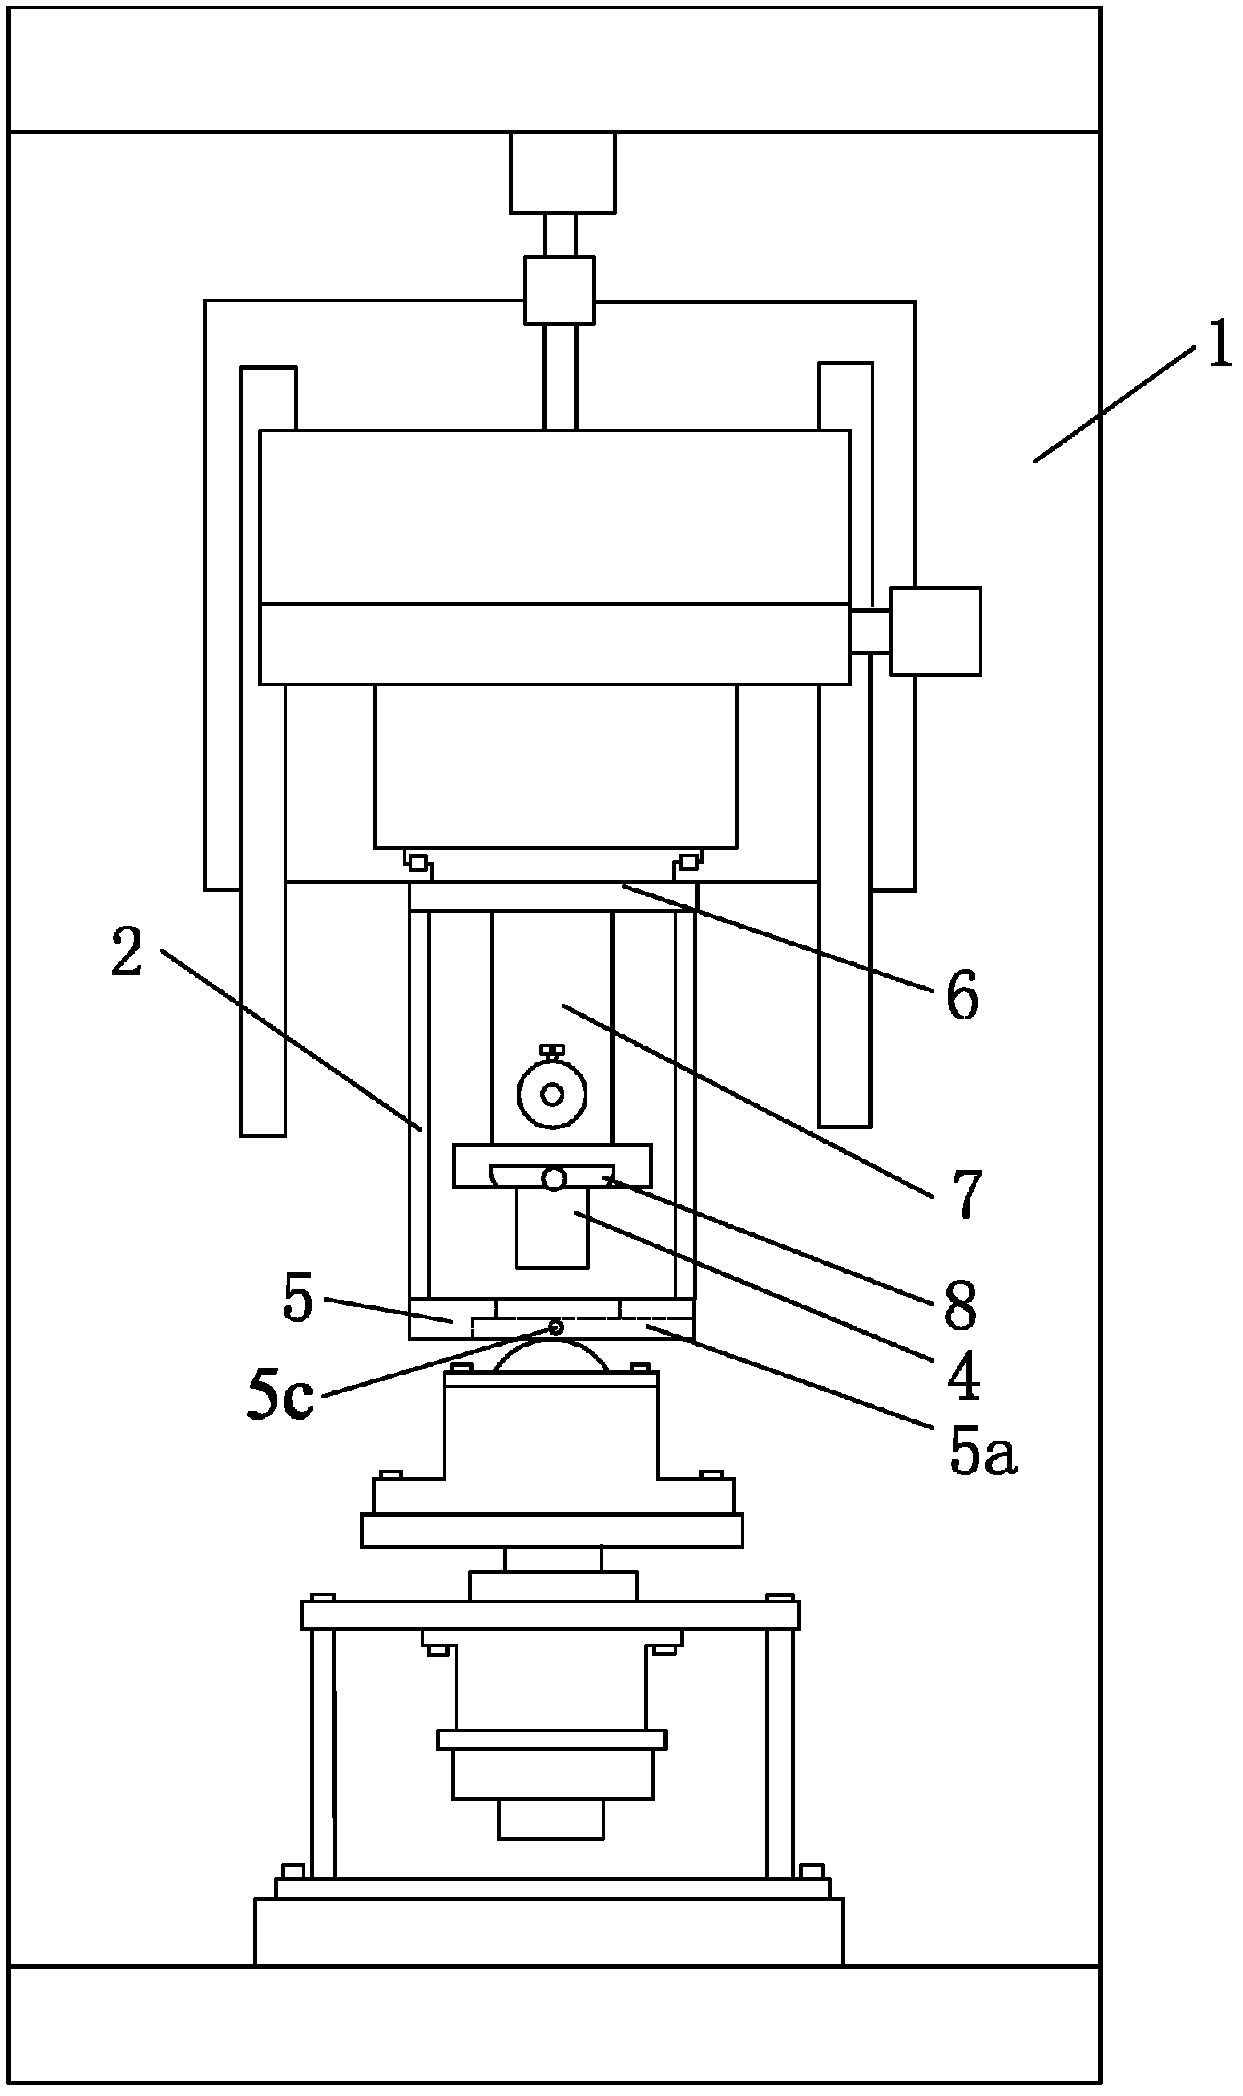 Apparatus for real time observation and recording of fretting wear